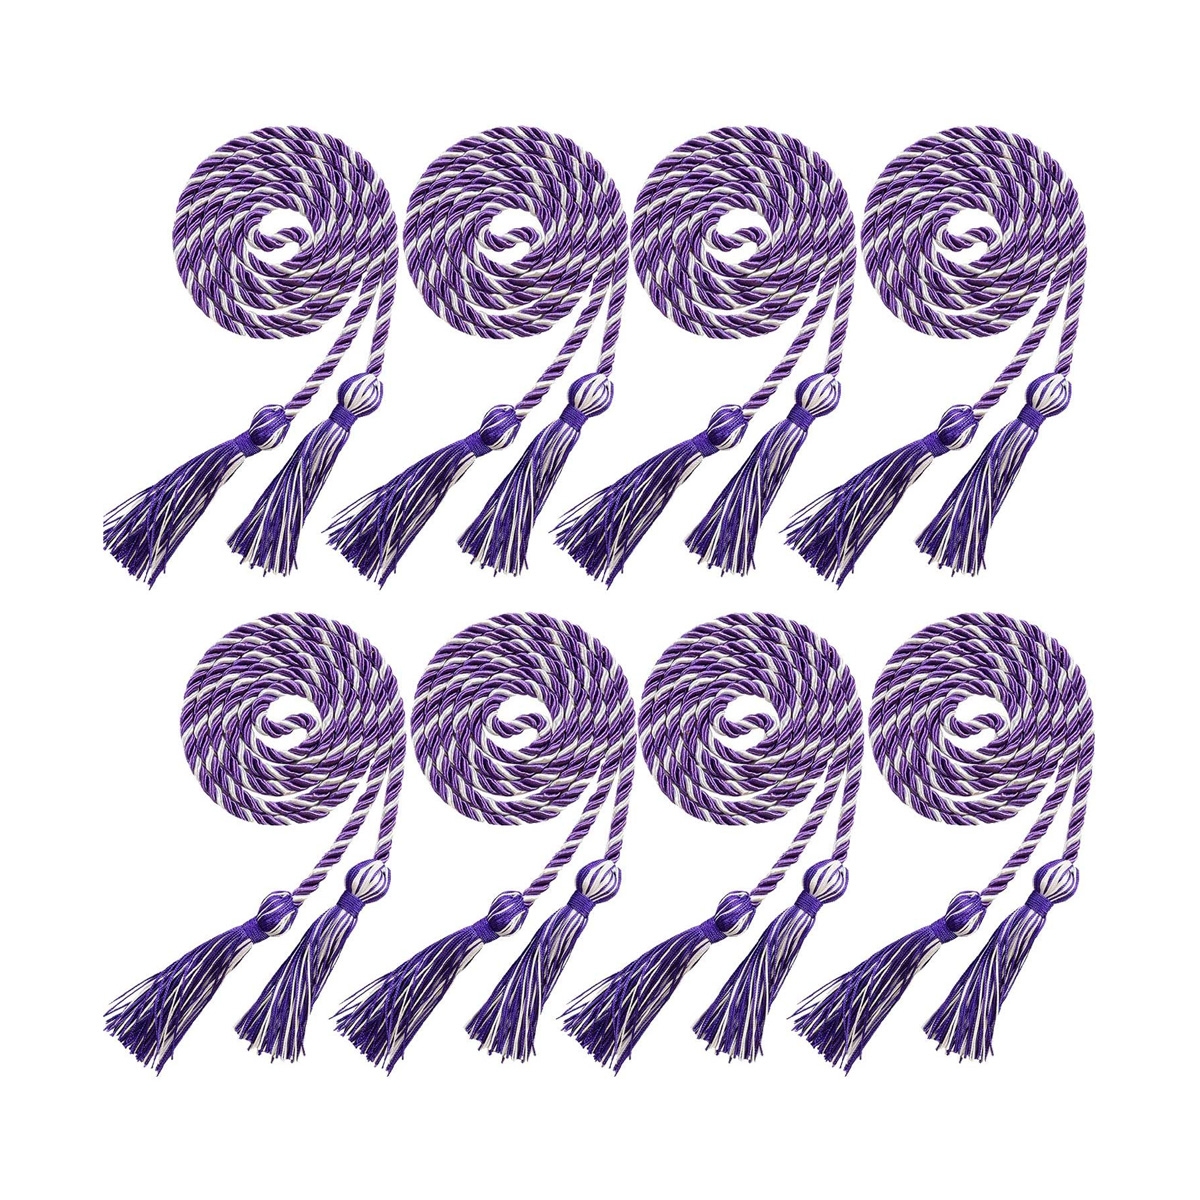 Graduation Cords Yarn Honor Cords with Tassel for College Graduation Students (White with Purple)